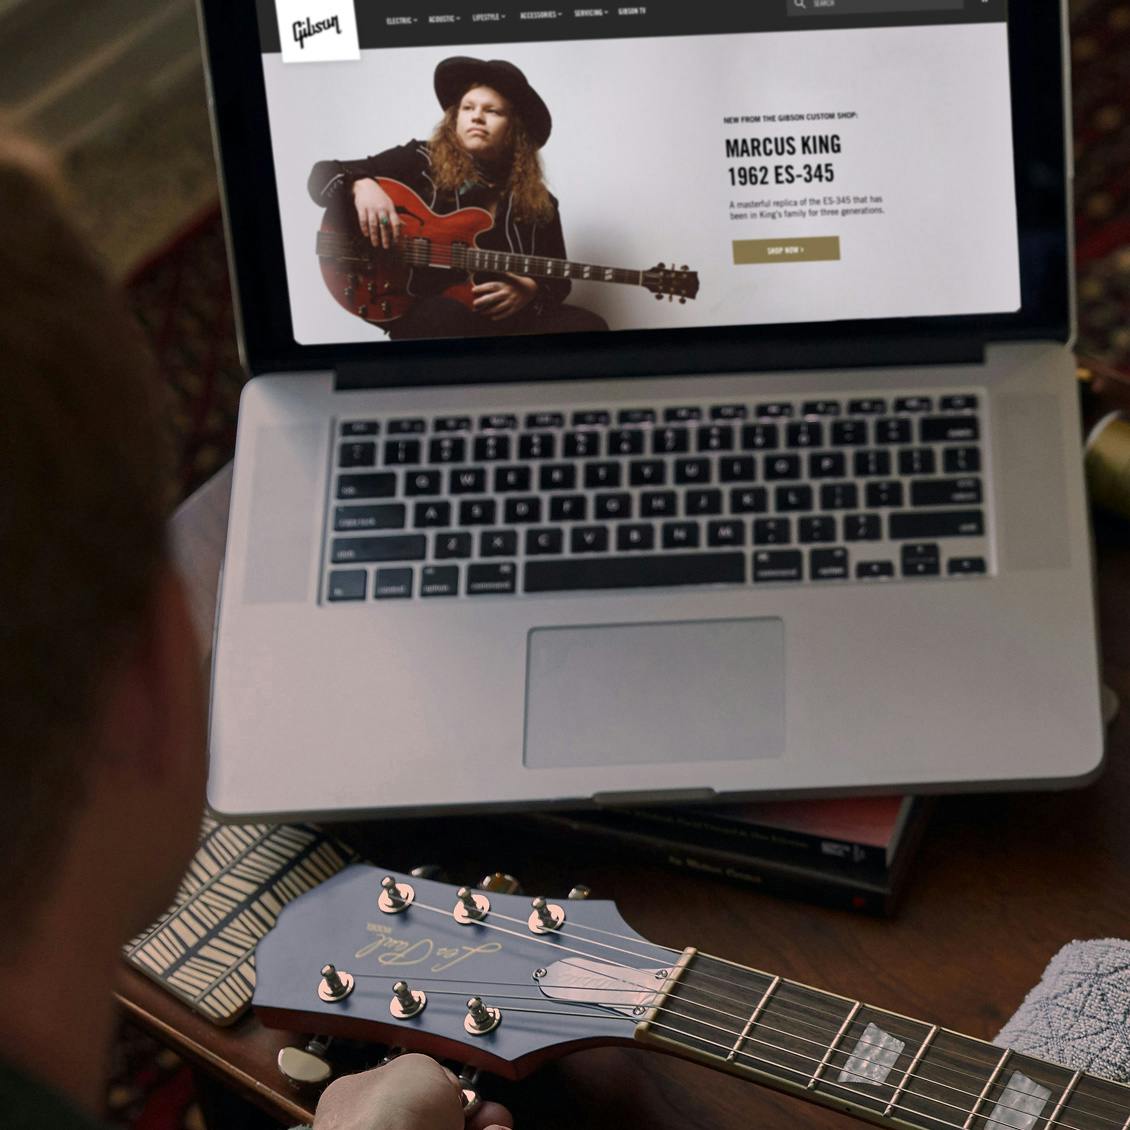 Computer with Gibson.com on the screen